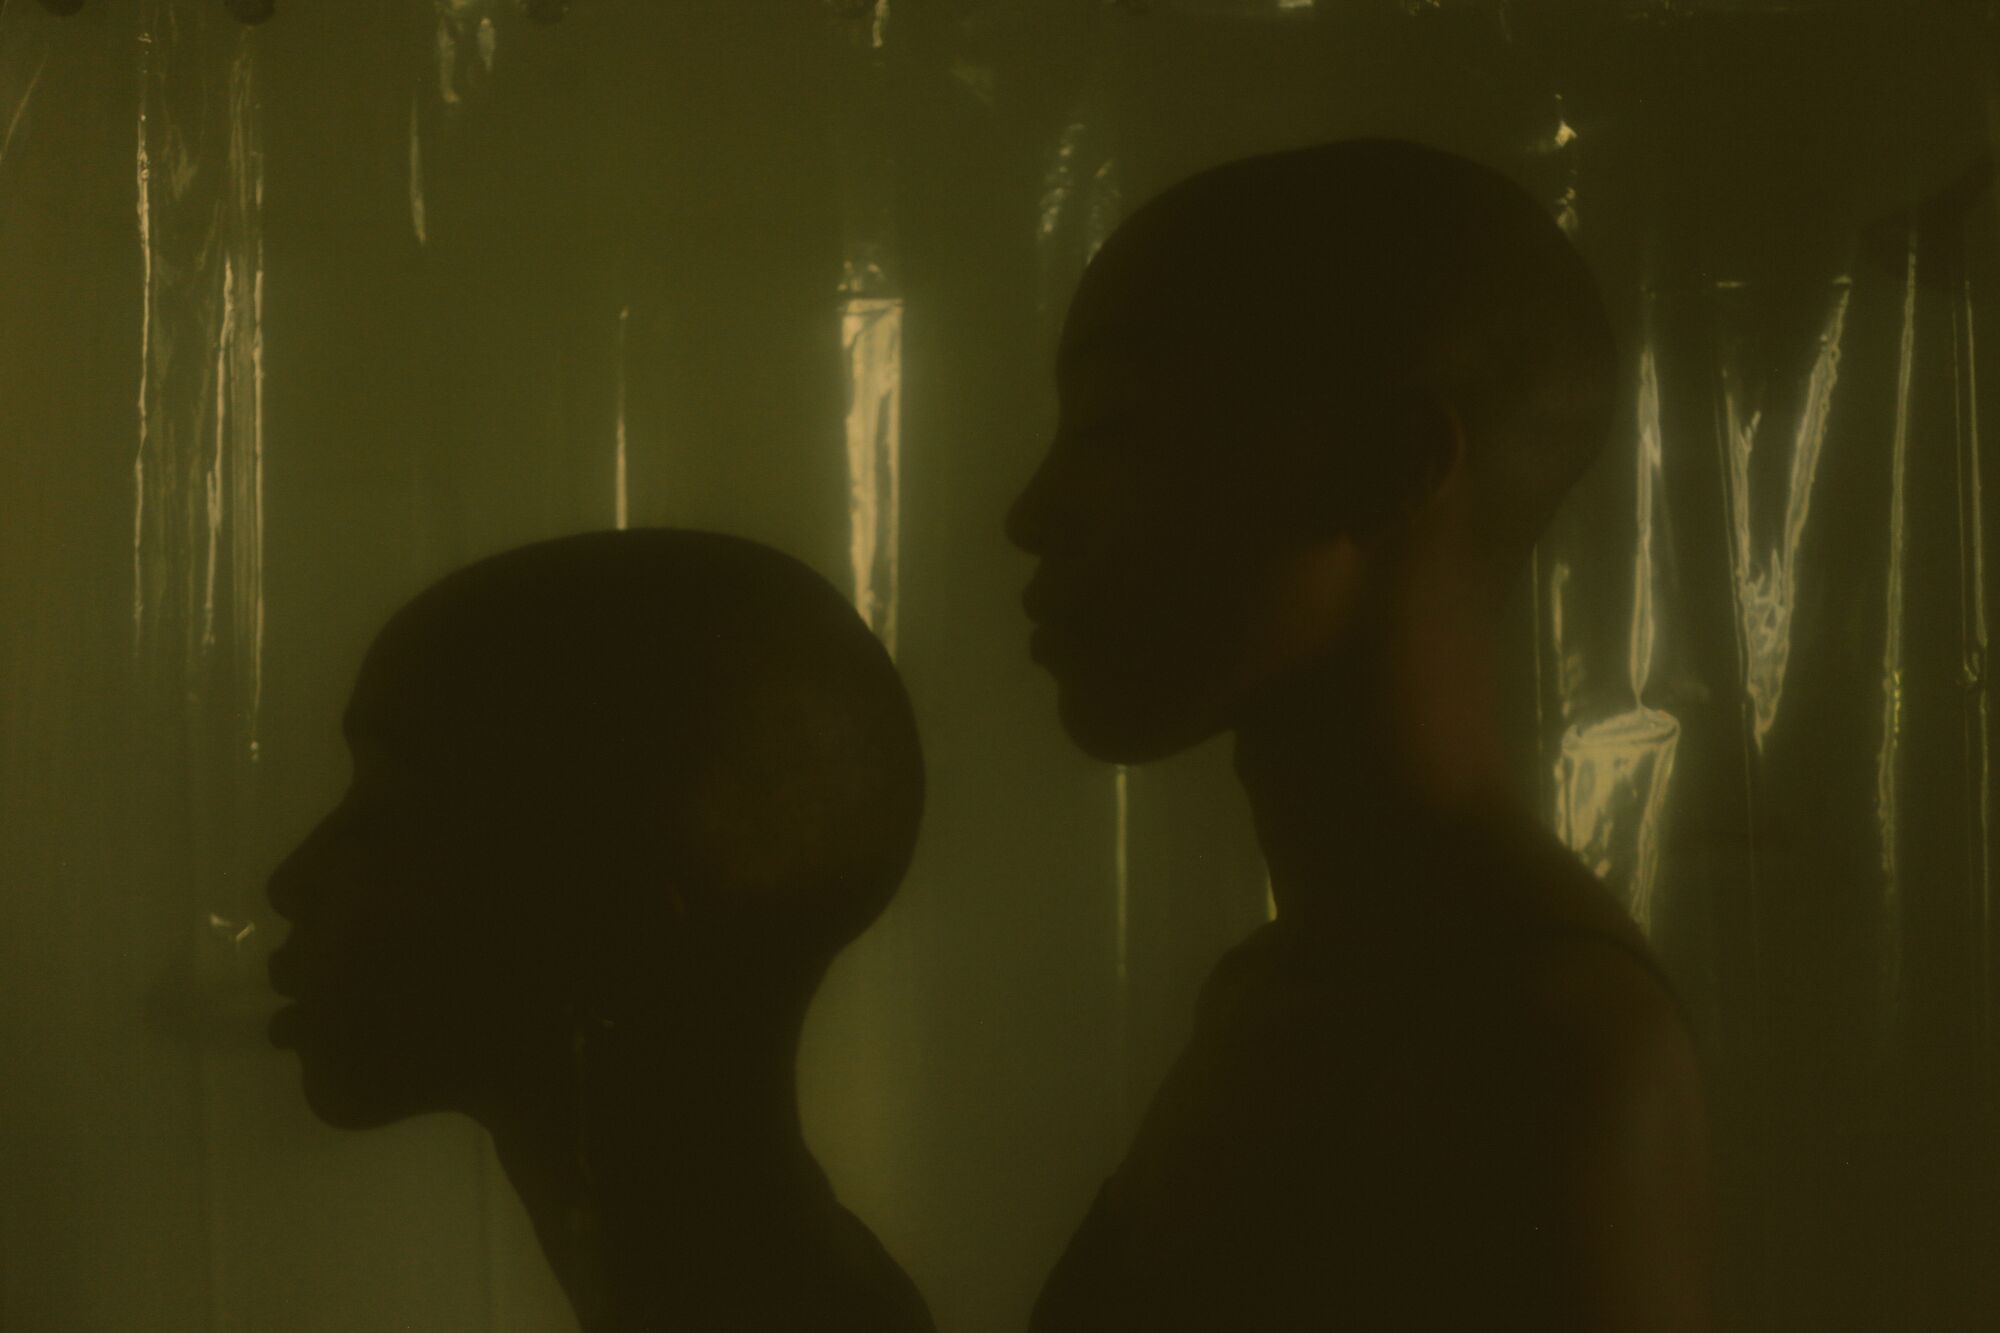 A photo of two women's silhouettes against a dark green backdrop.